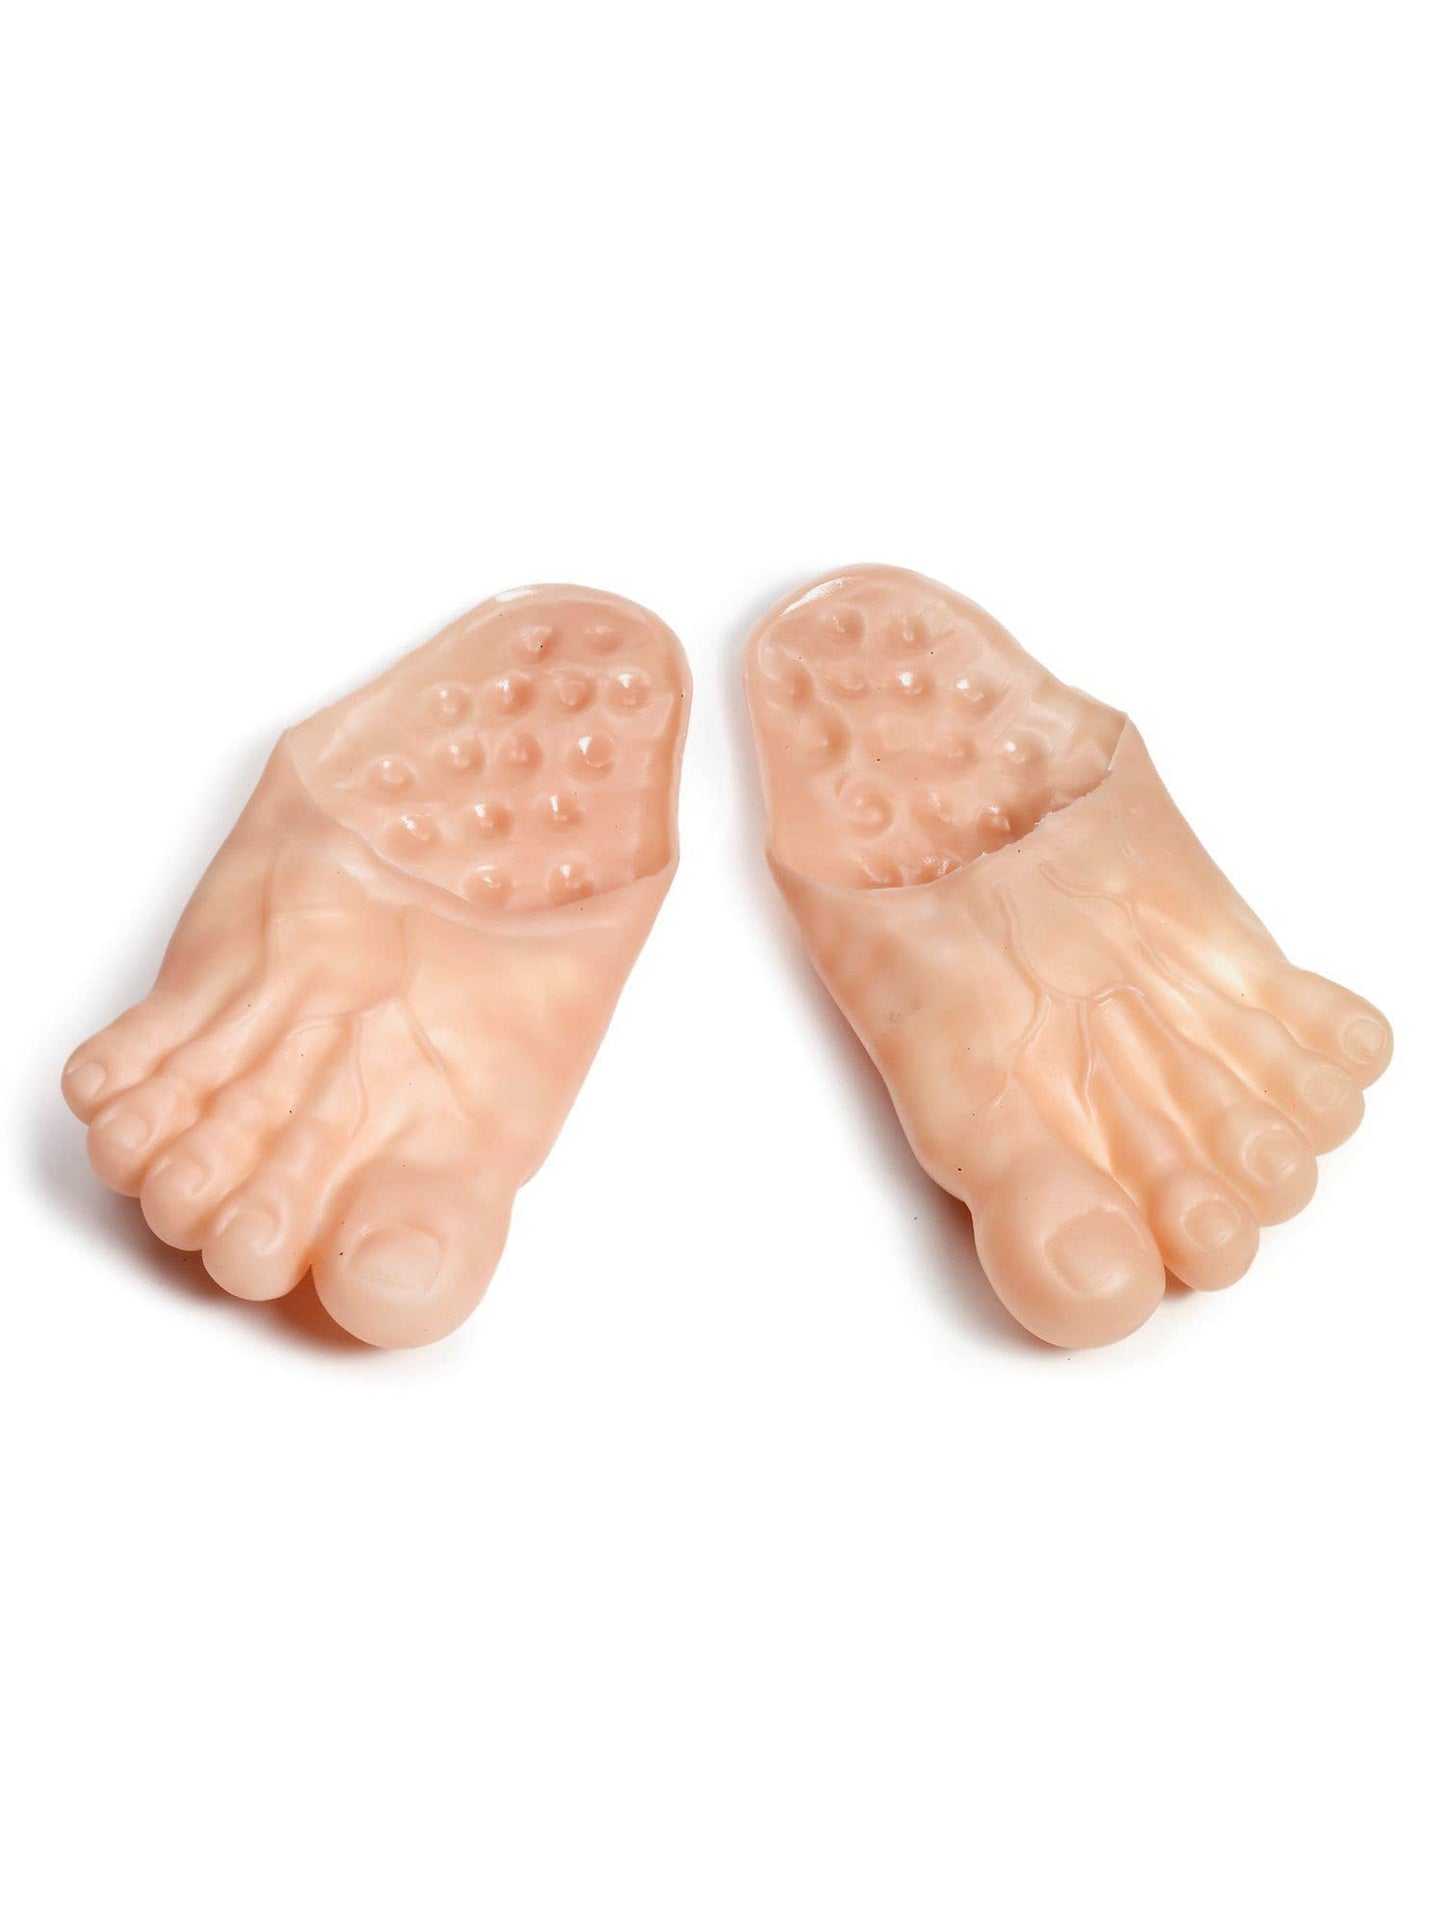 Giant Plastic Feet, As Shown, One Size